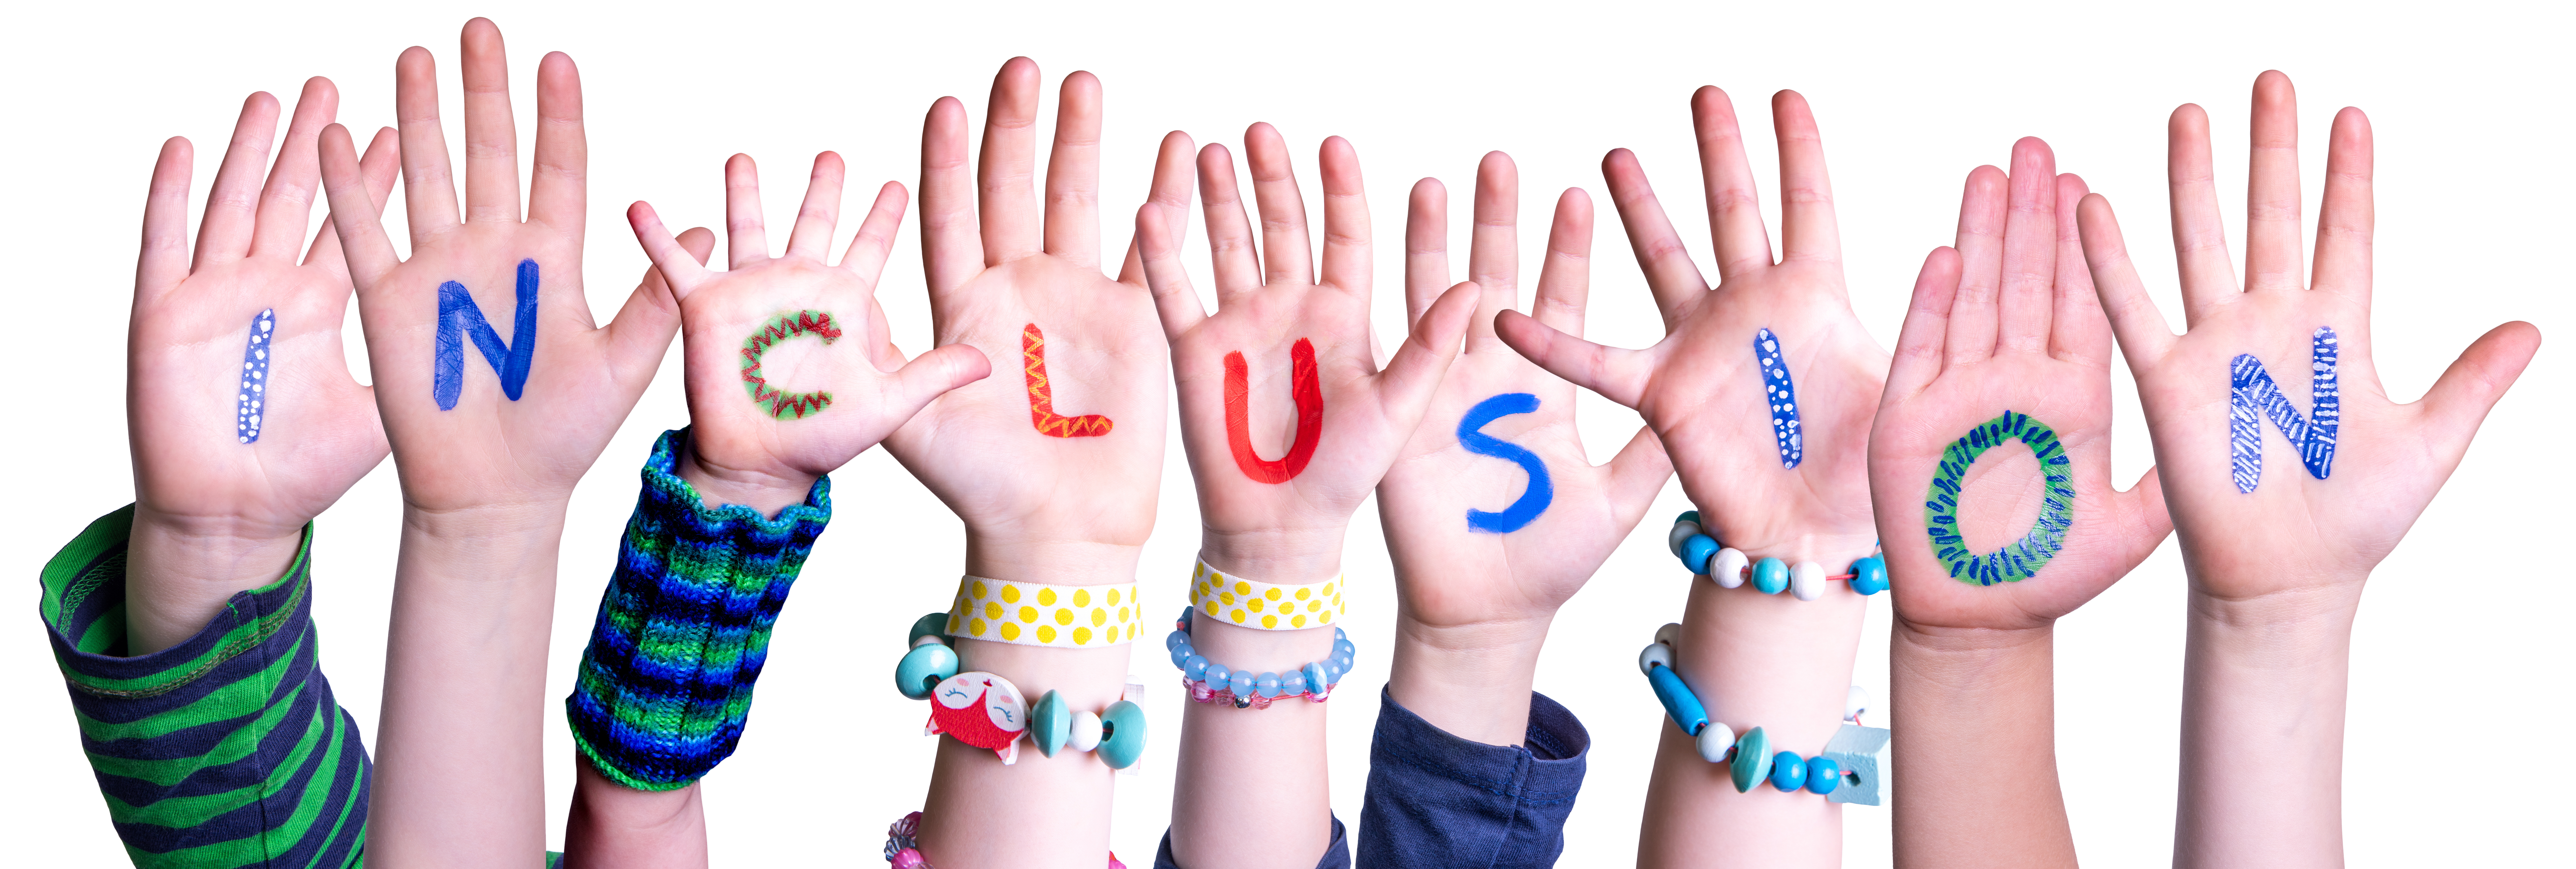 Image of a group of children's hands spelling out the word "Inclusion"